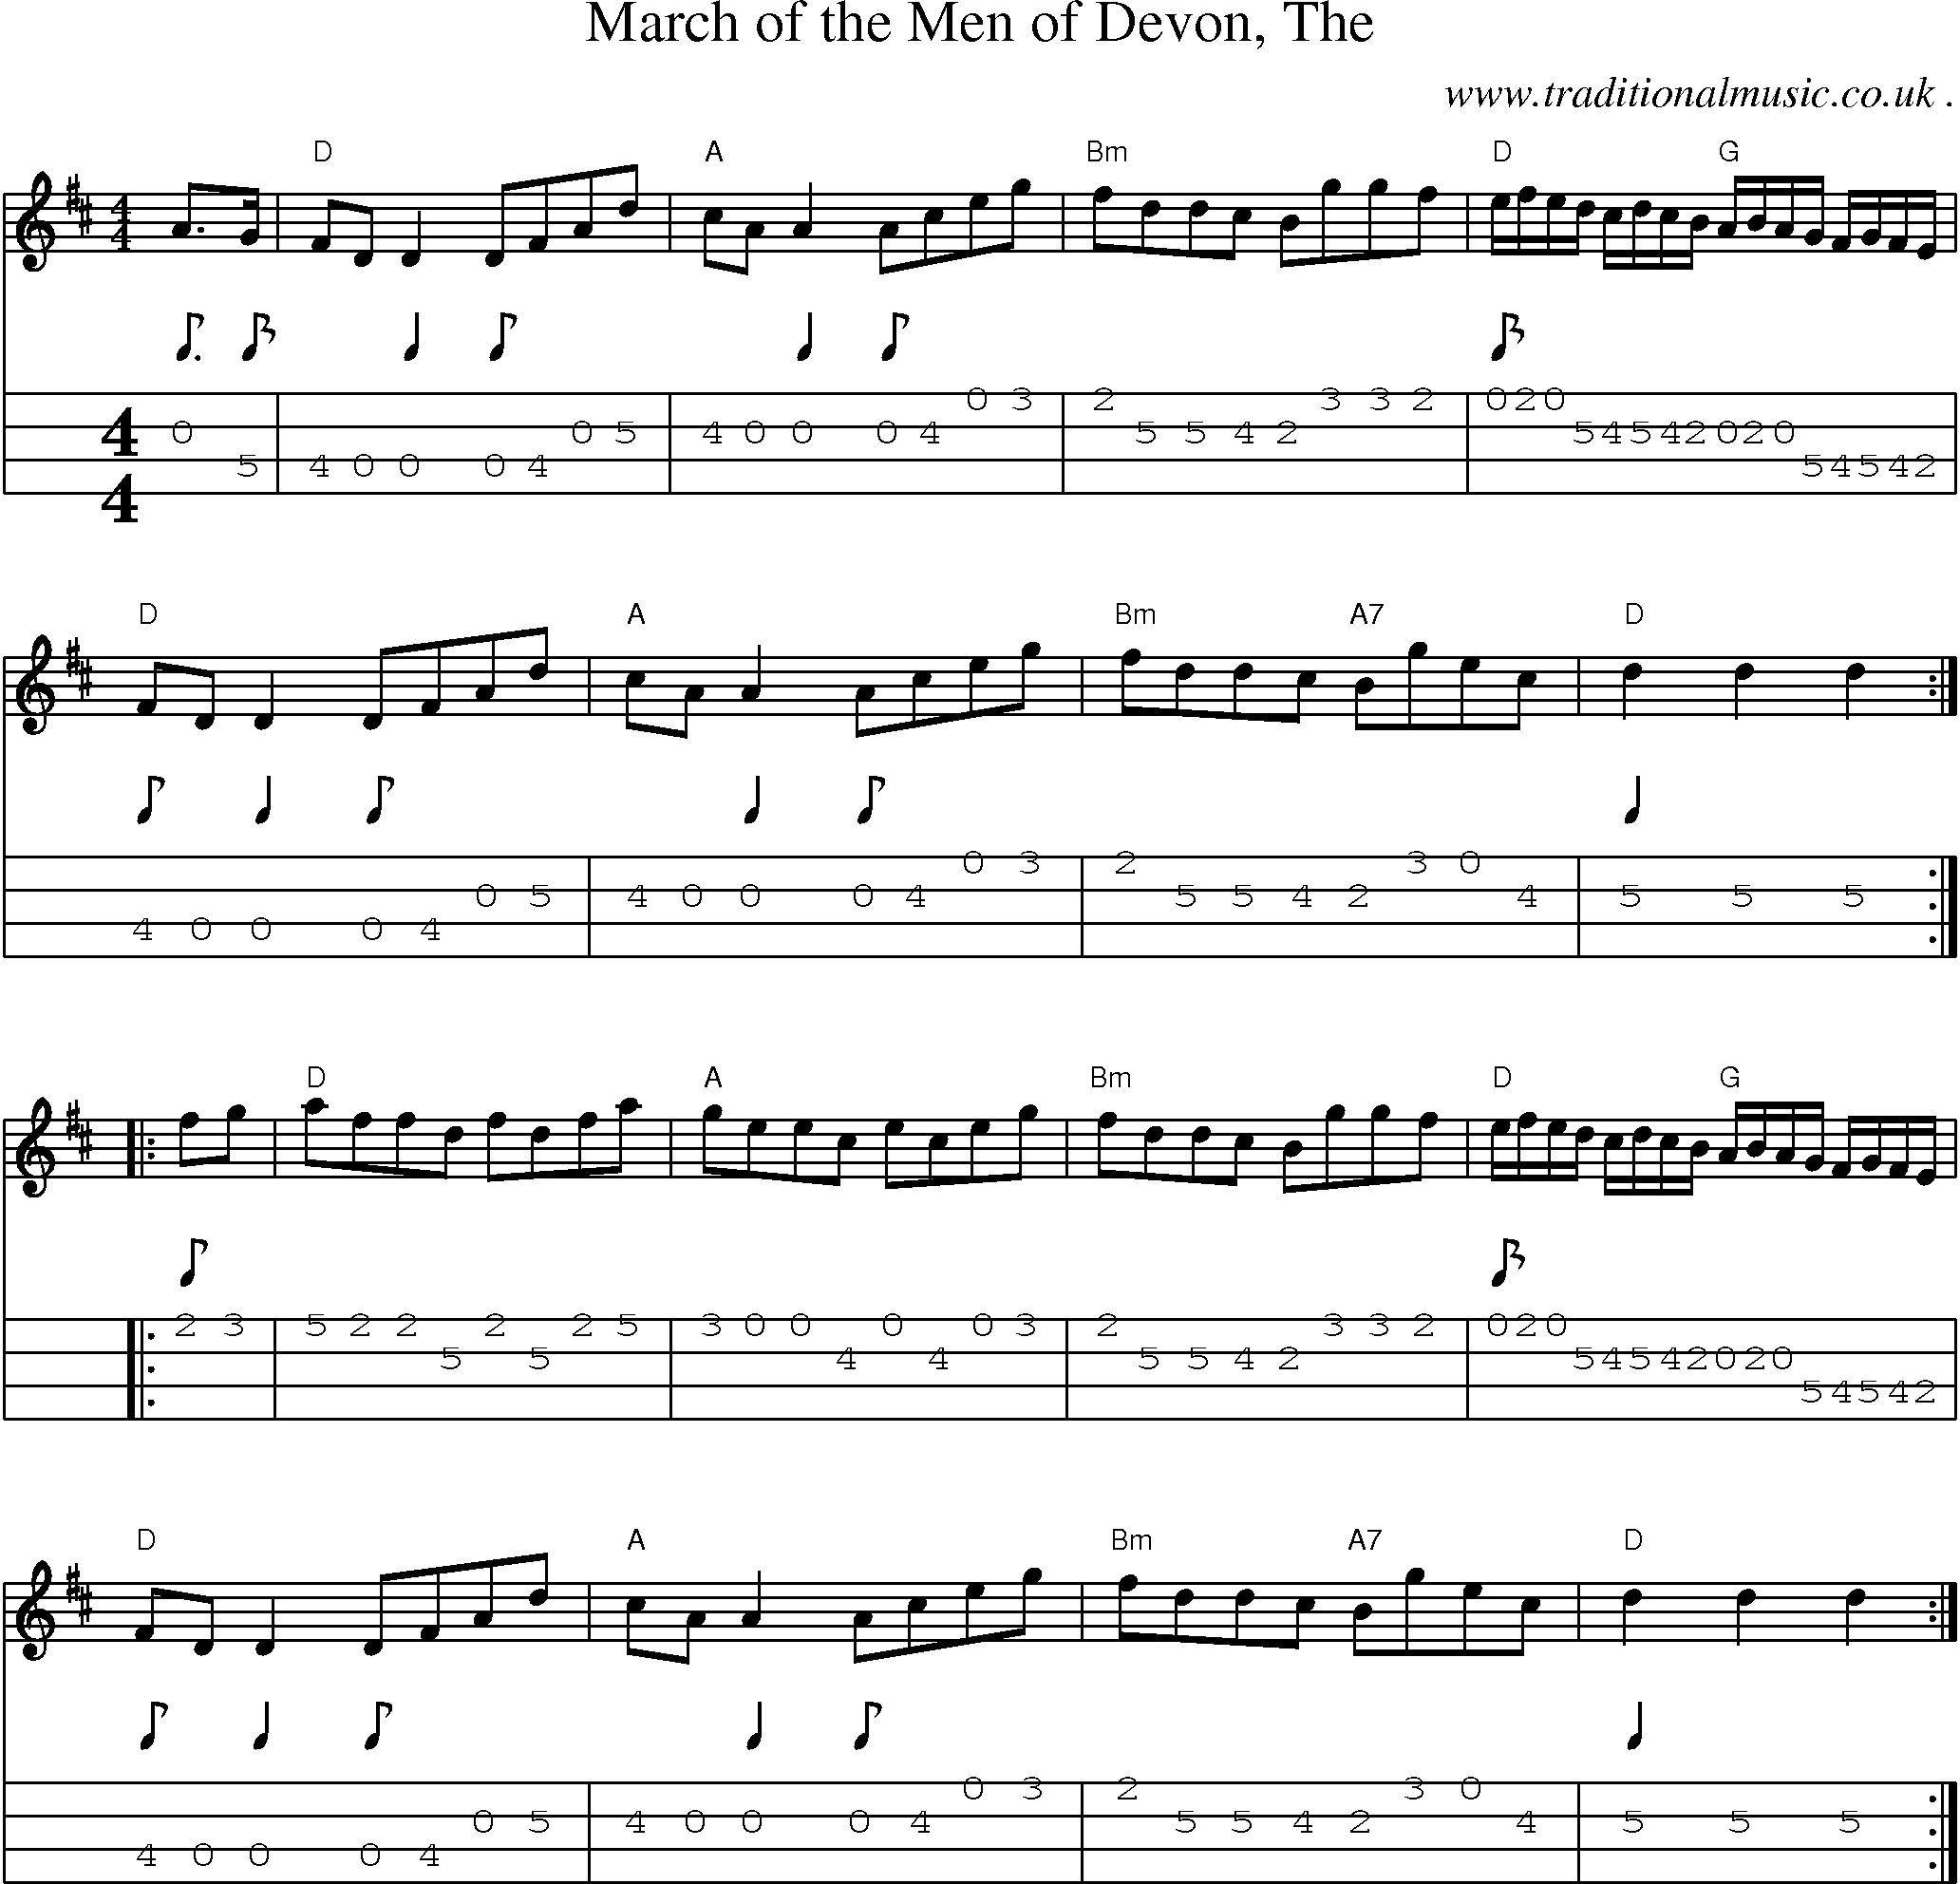 Music Score and Guitar Tabs for March of the Men of Devon The